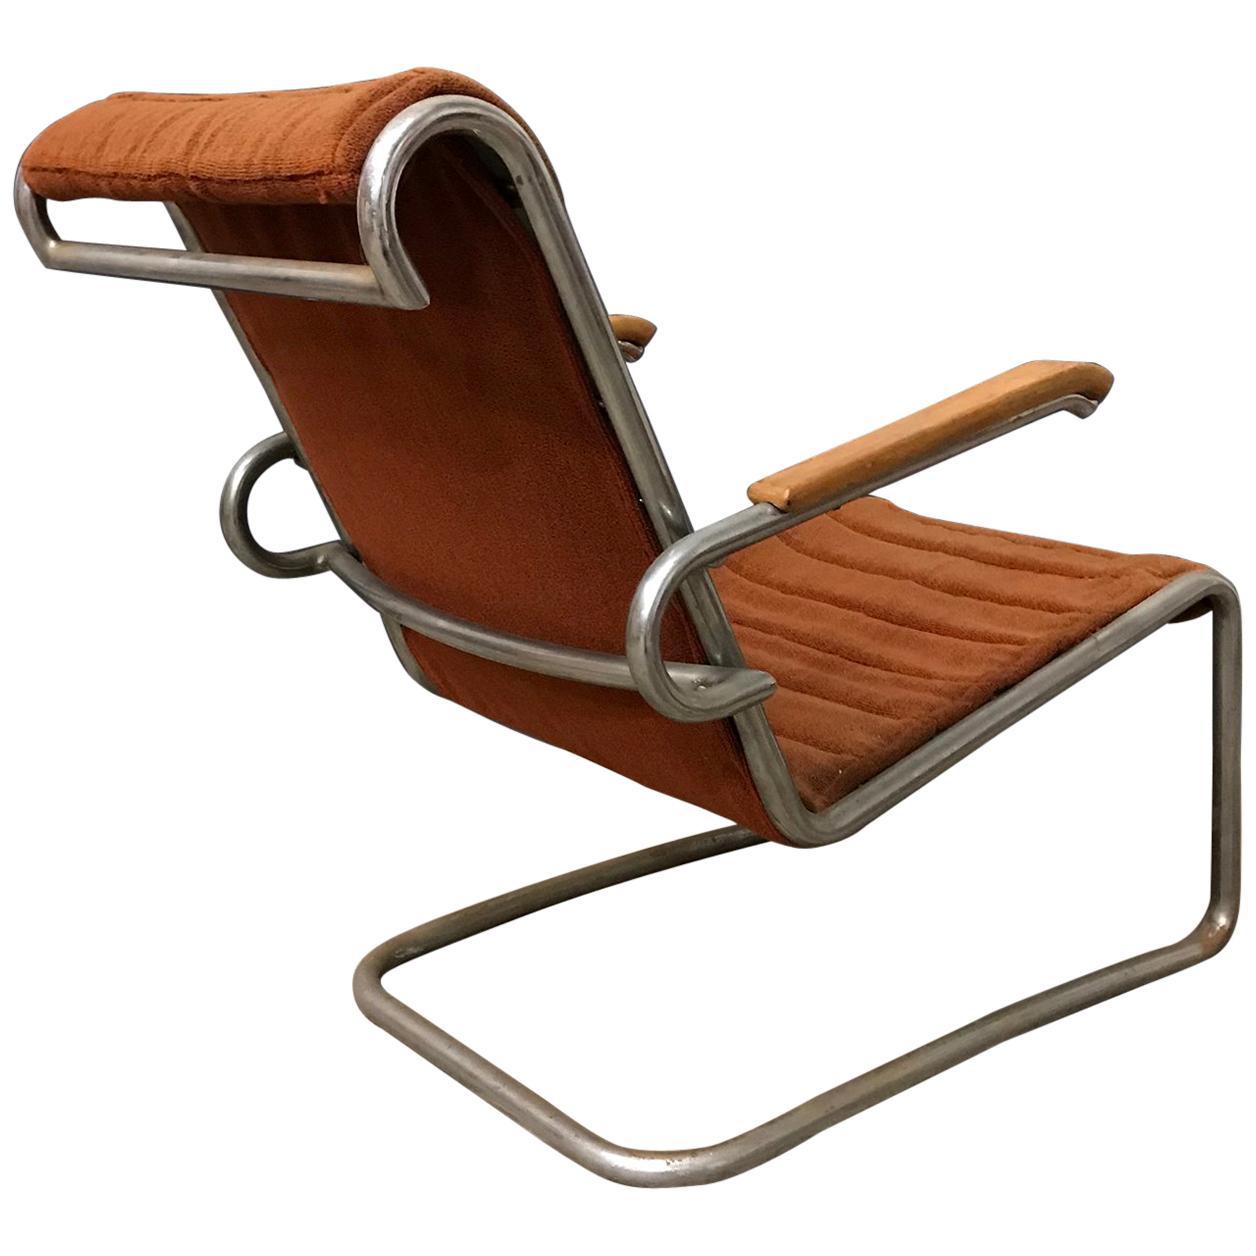 Gebr. de Wit Original Easy Chair with First Fabric, circa 1930